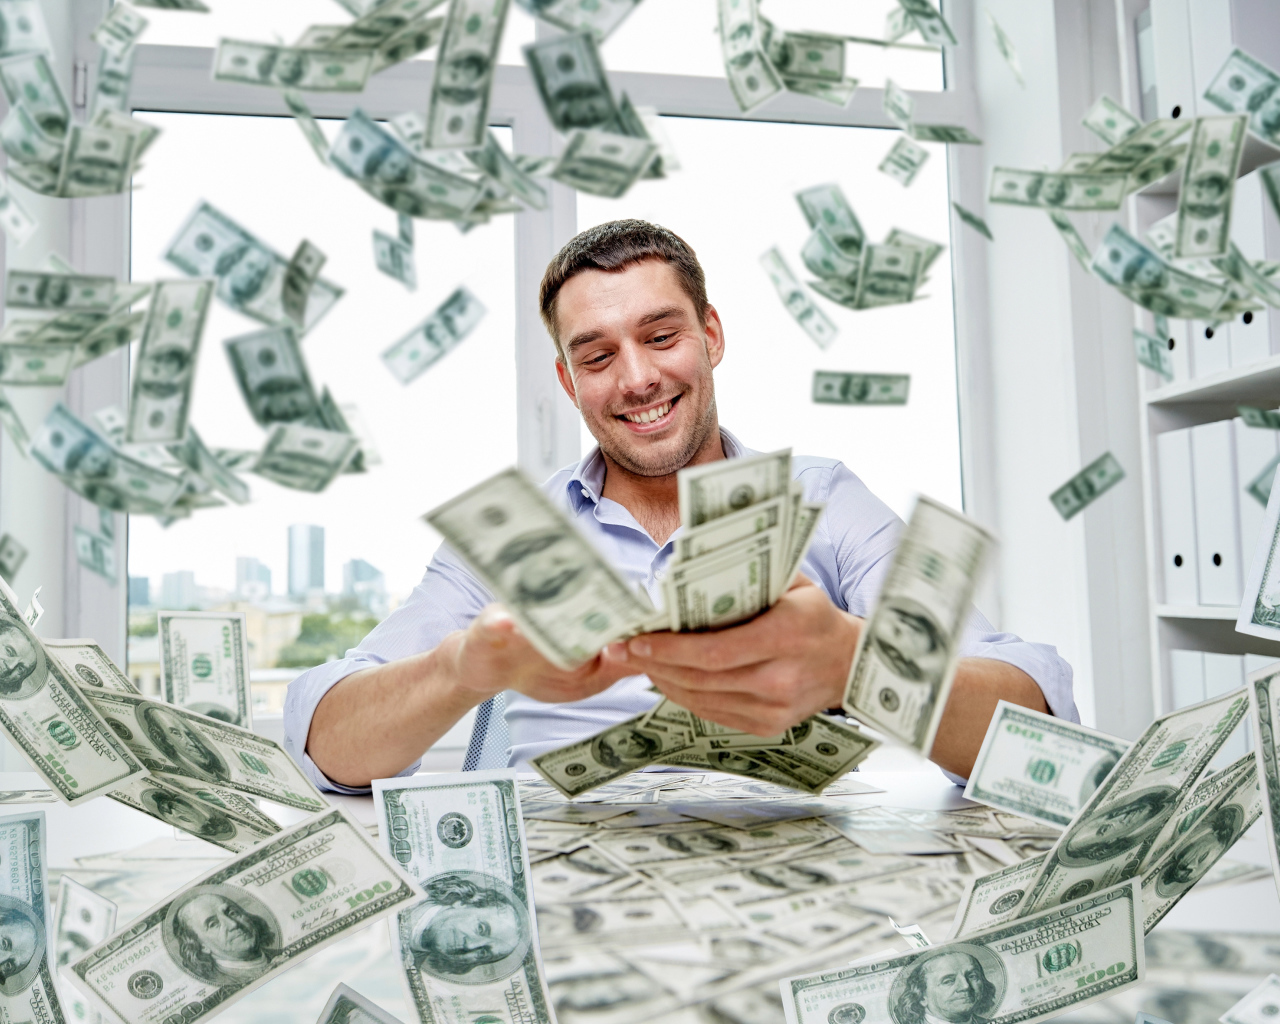 A smiling man is scattering dollars